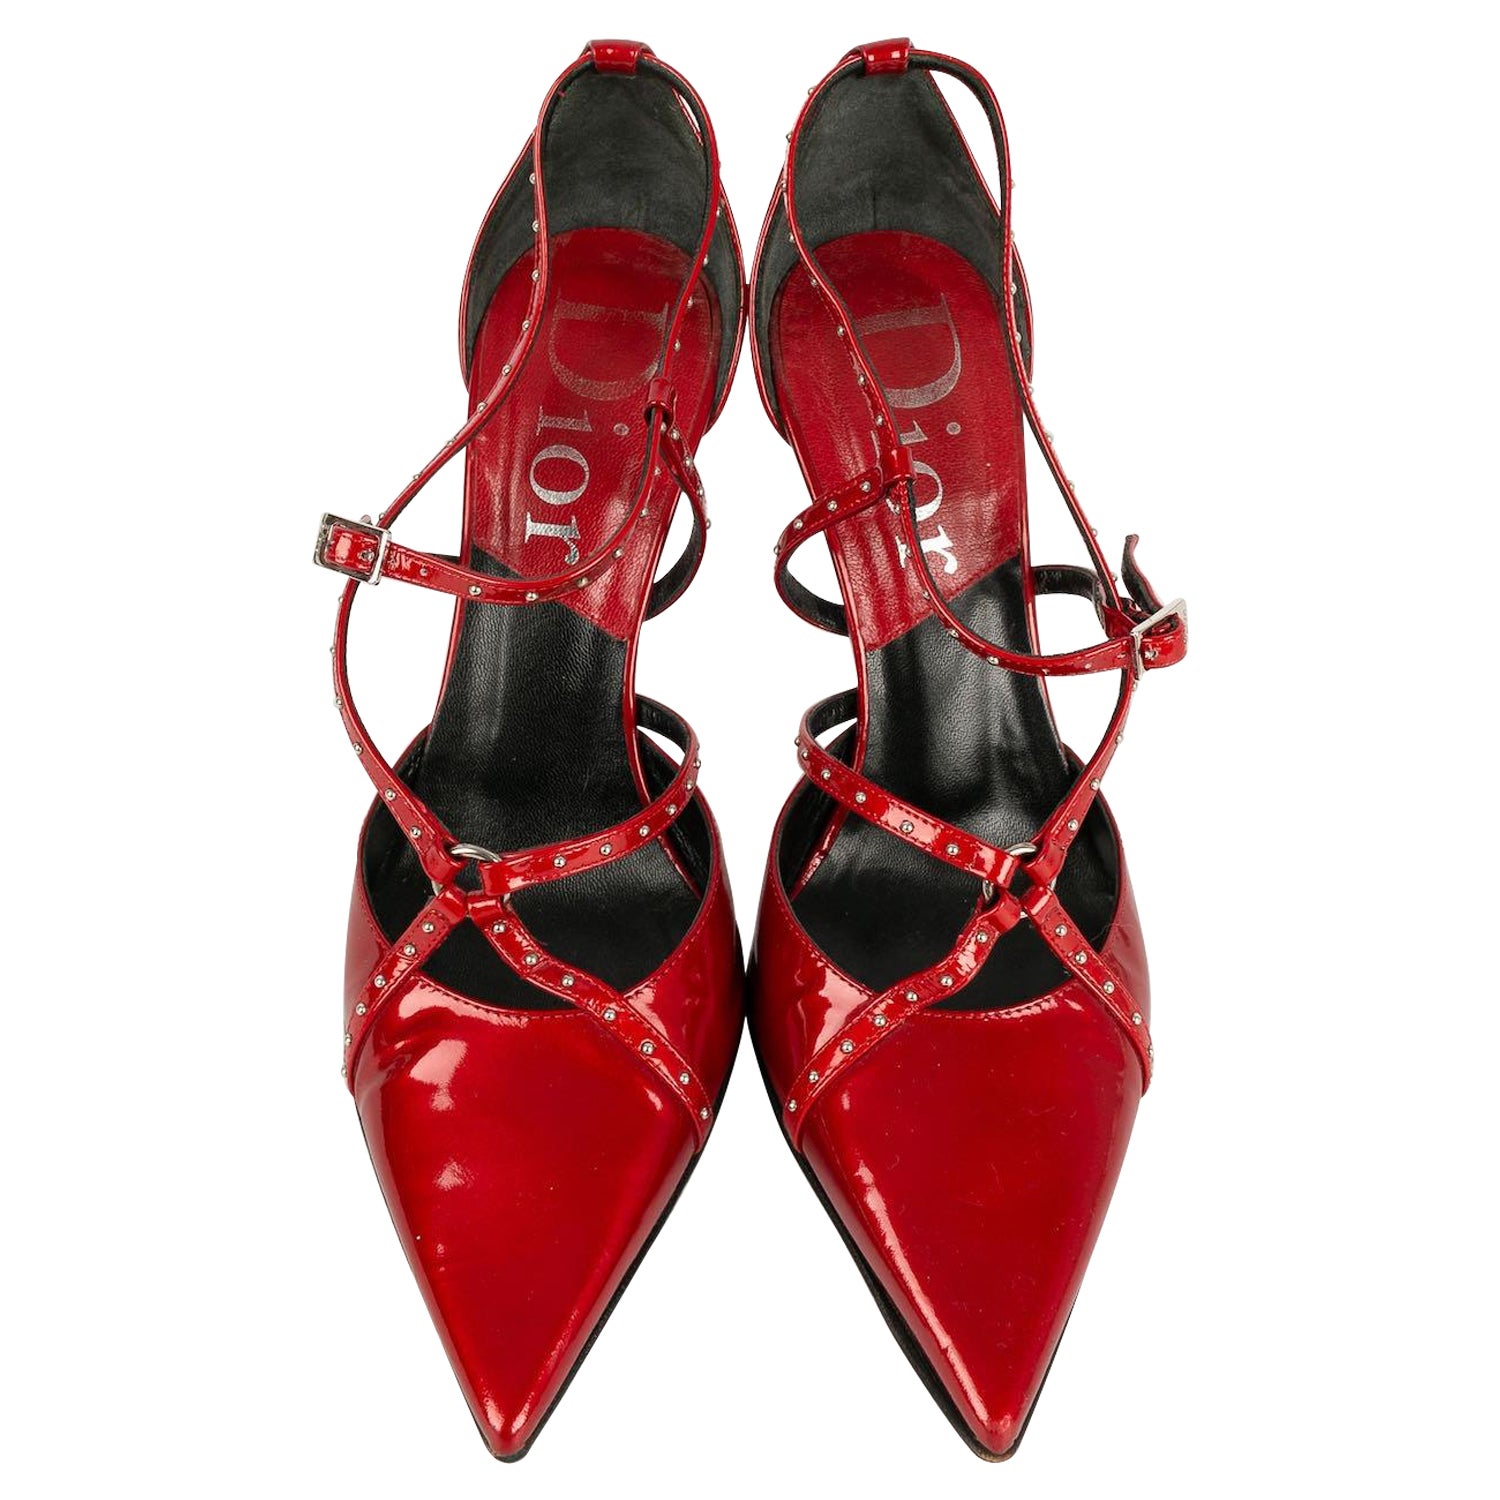 Dior Leather Pumps in Red Leather Pumps